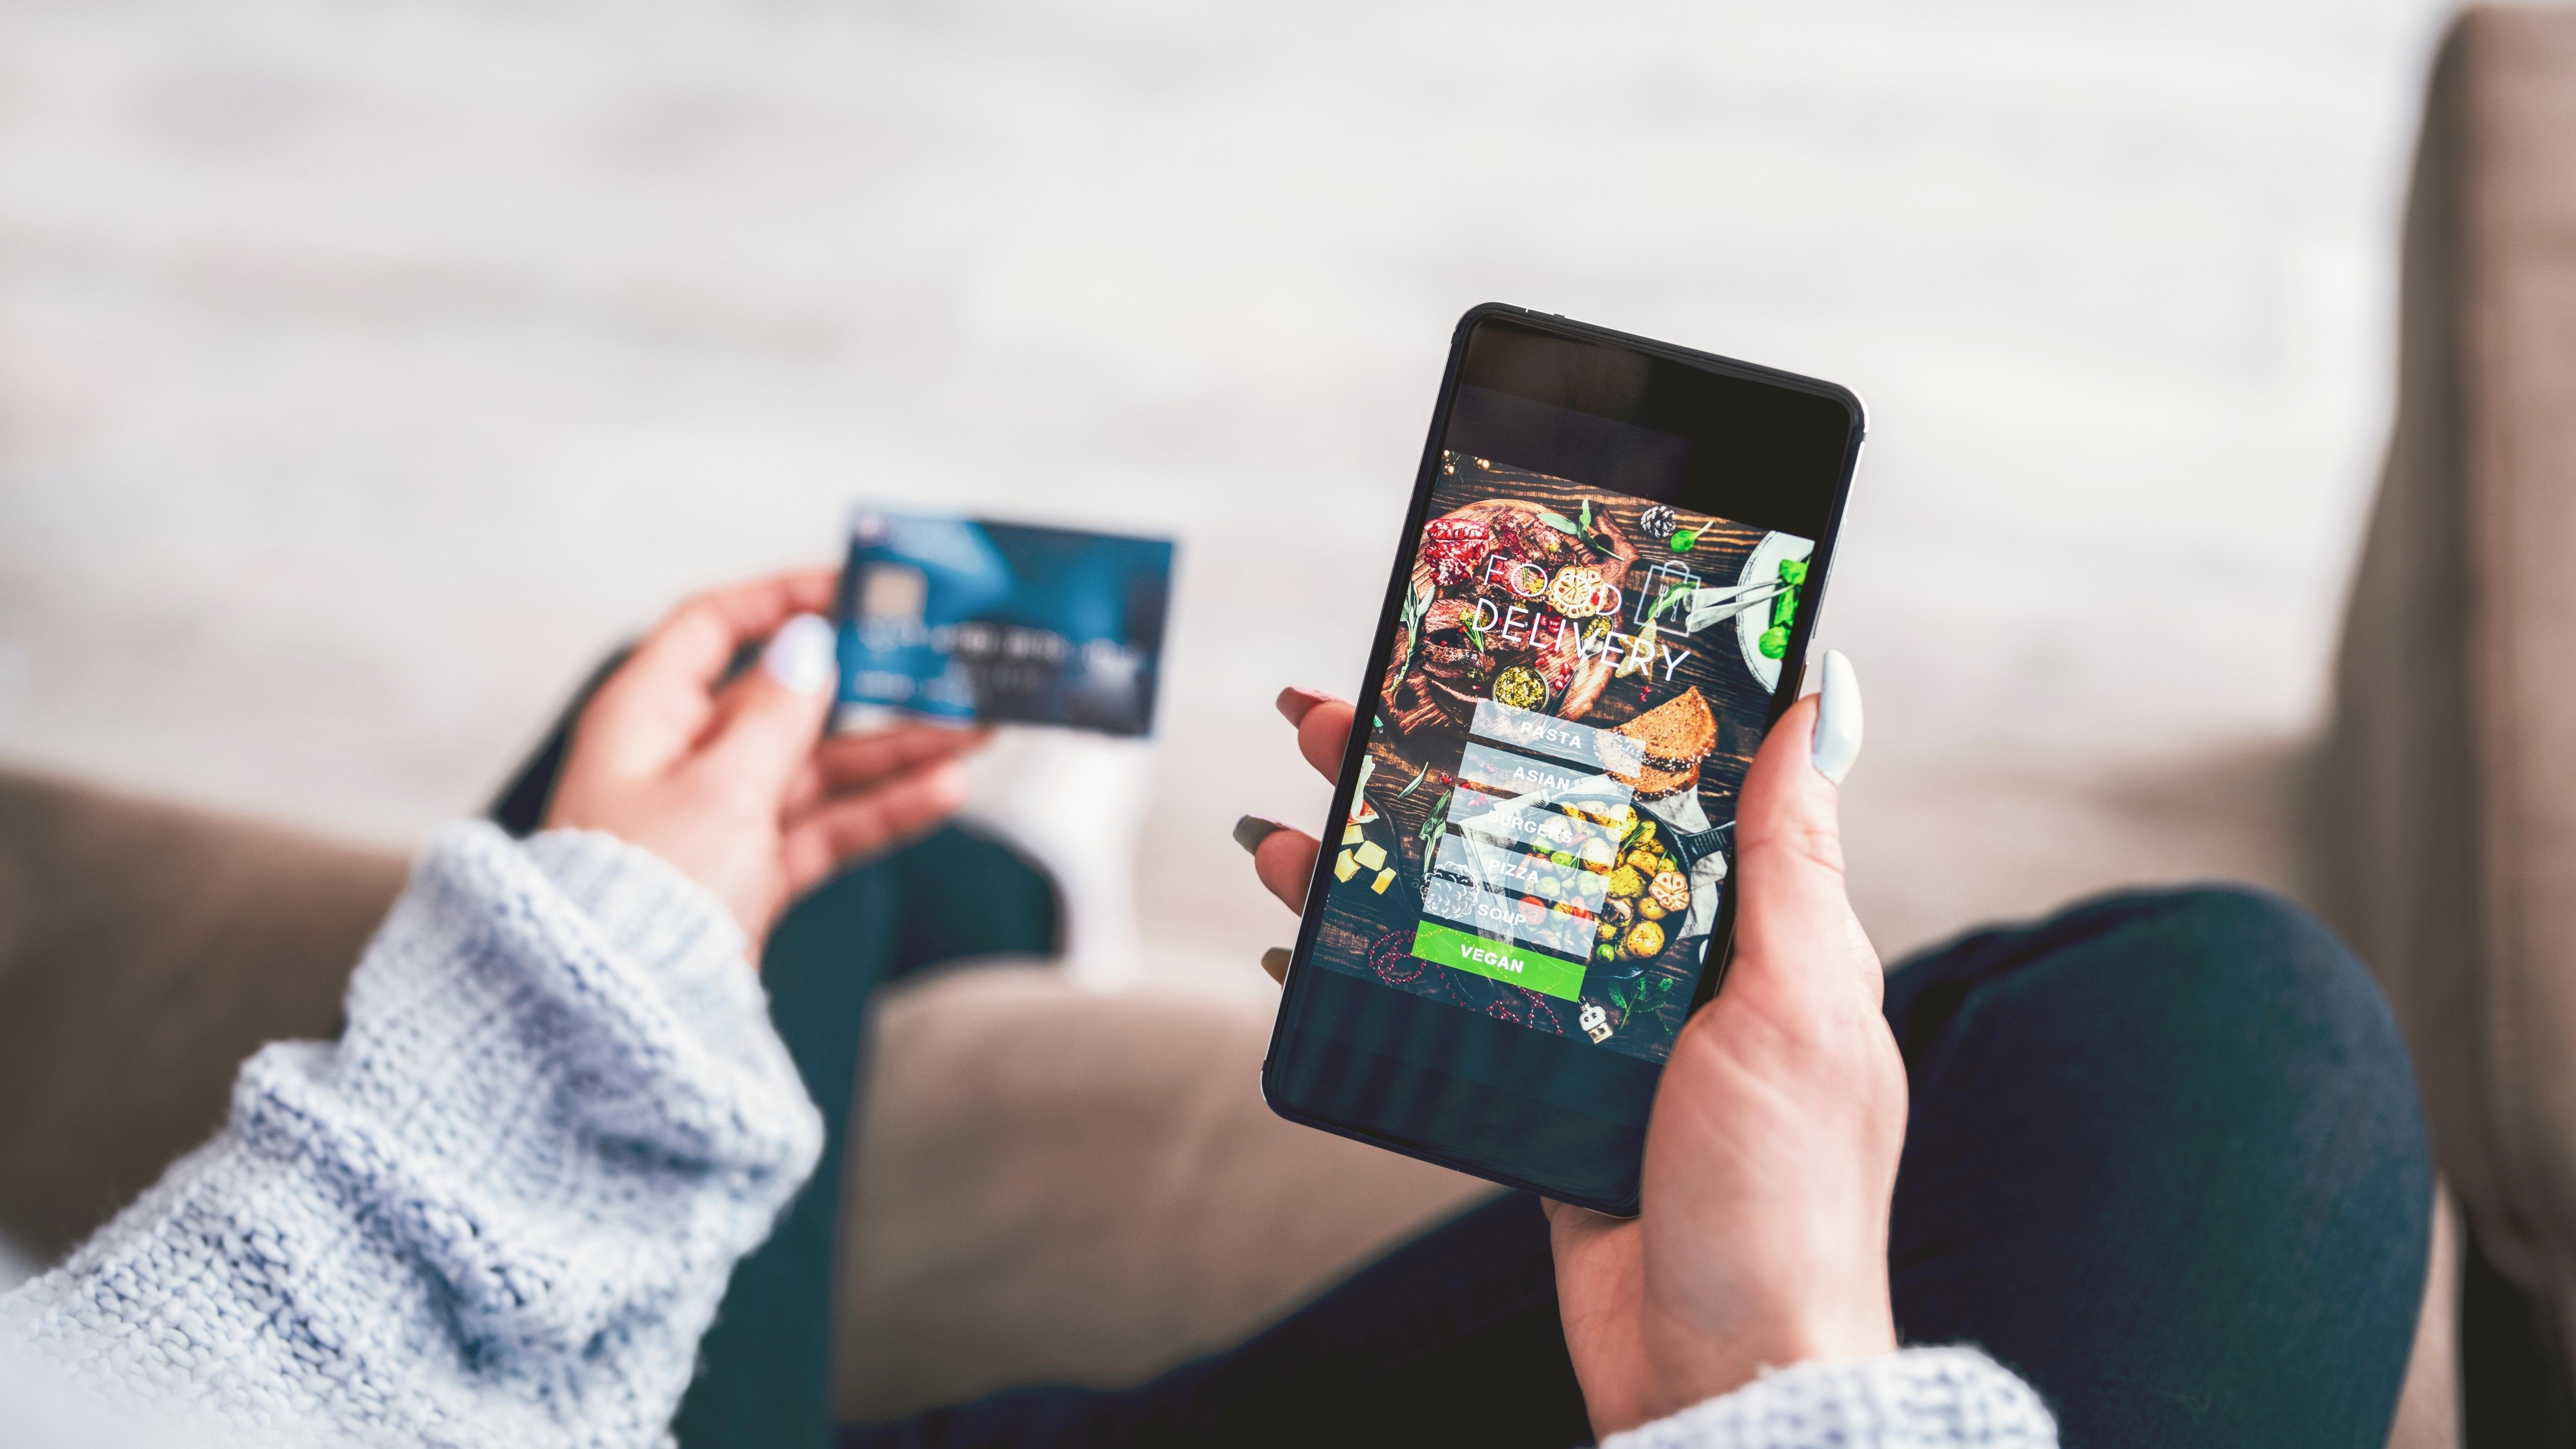 Customers Are Increasingly Using Their Smartphones to Order Food